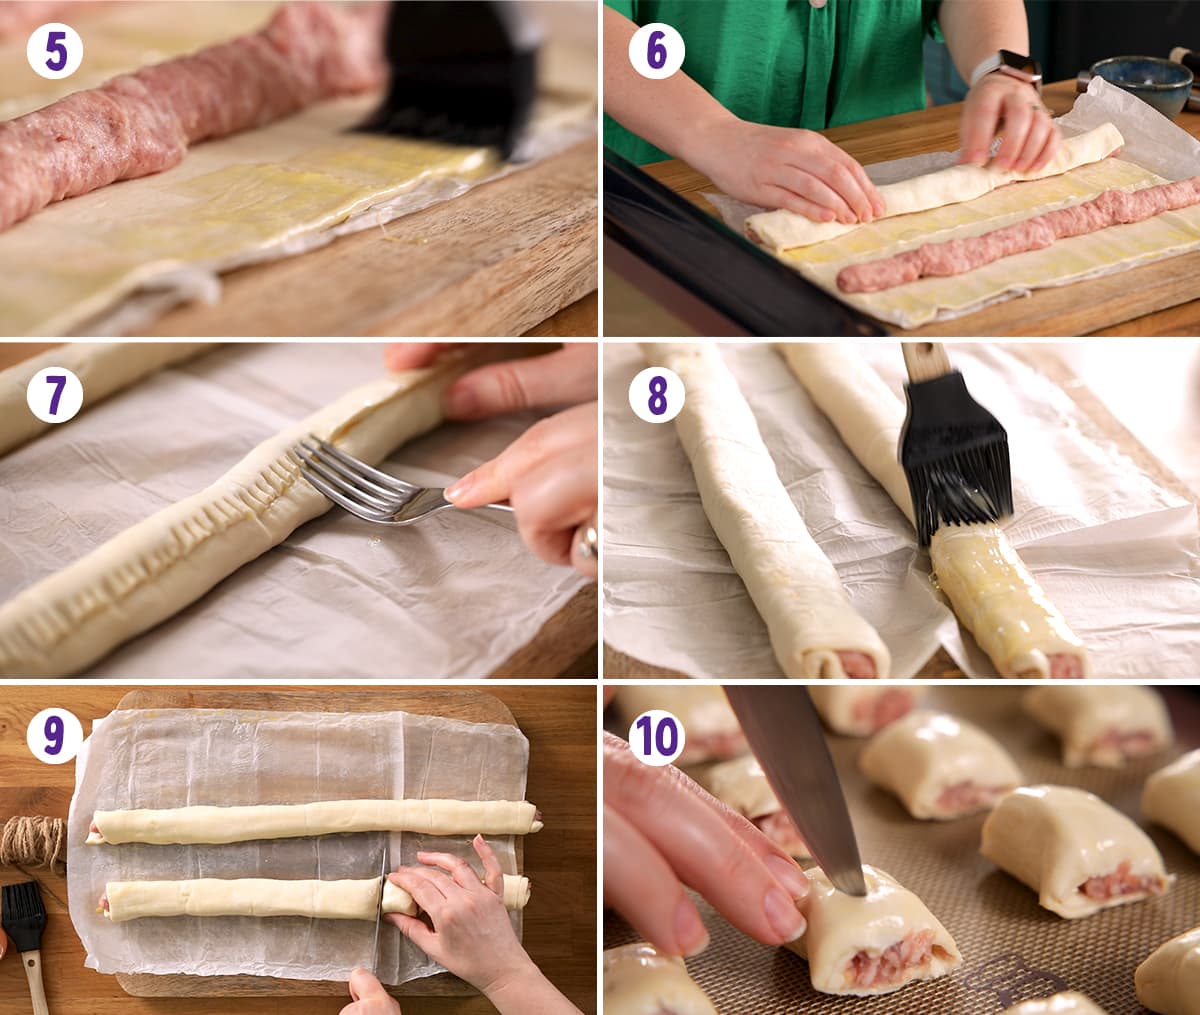 6 image collage showing final steps to make homemade sausage rolls